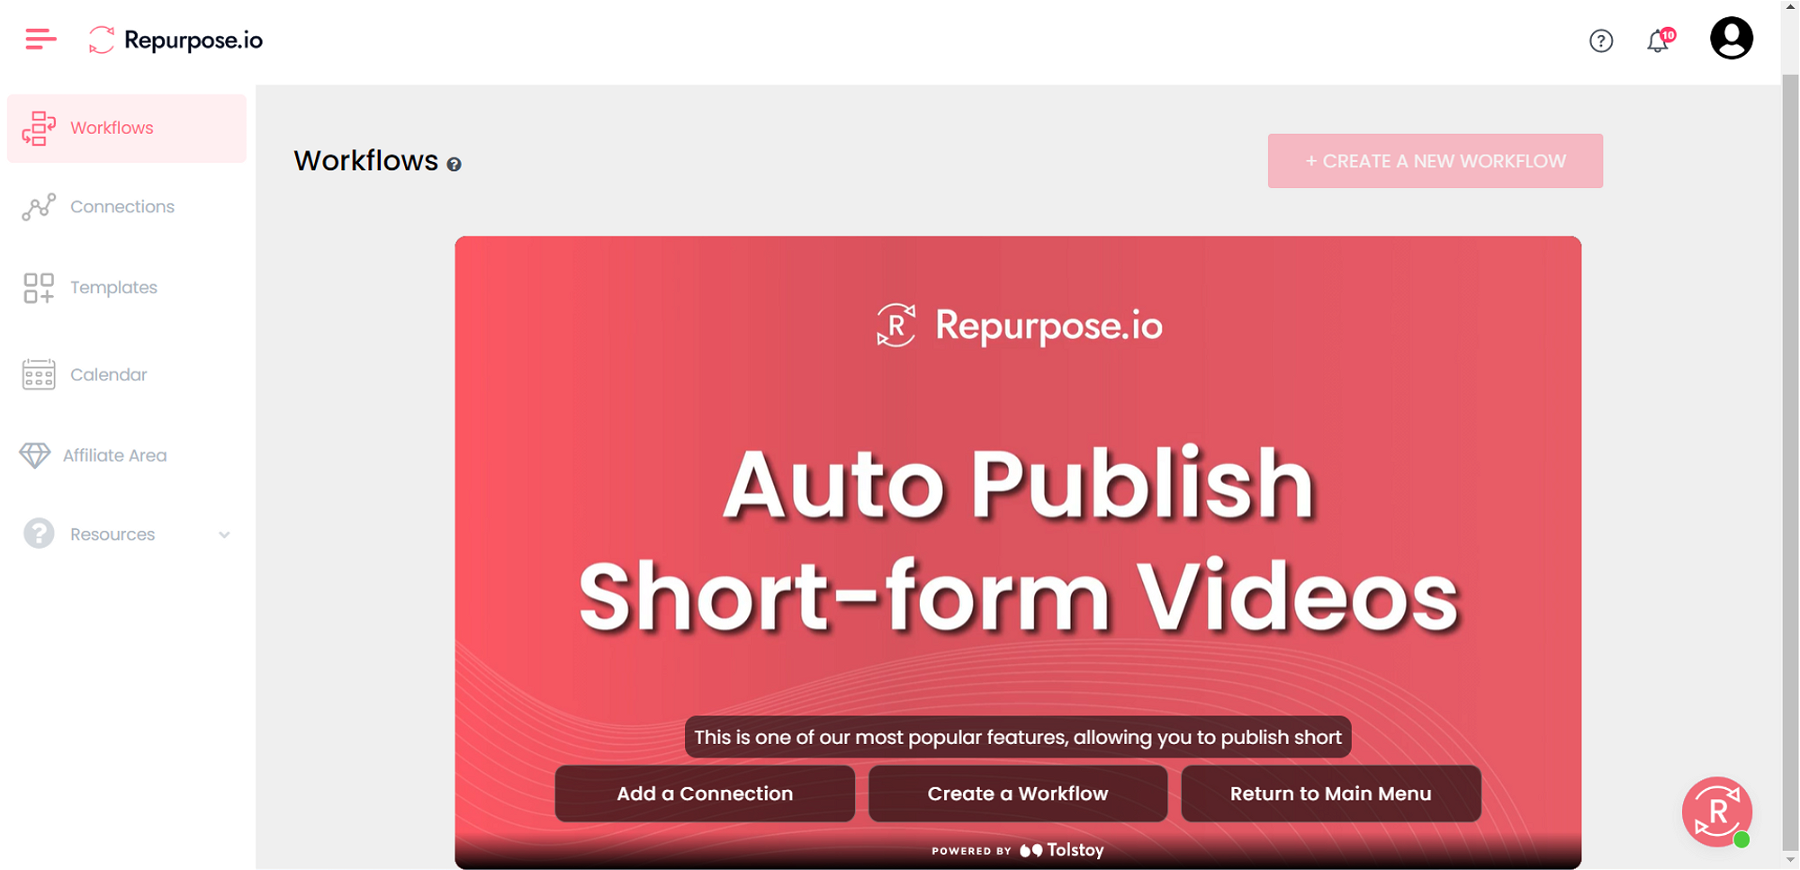 You can auto-publish short-form videos with RePurpose.